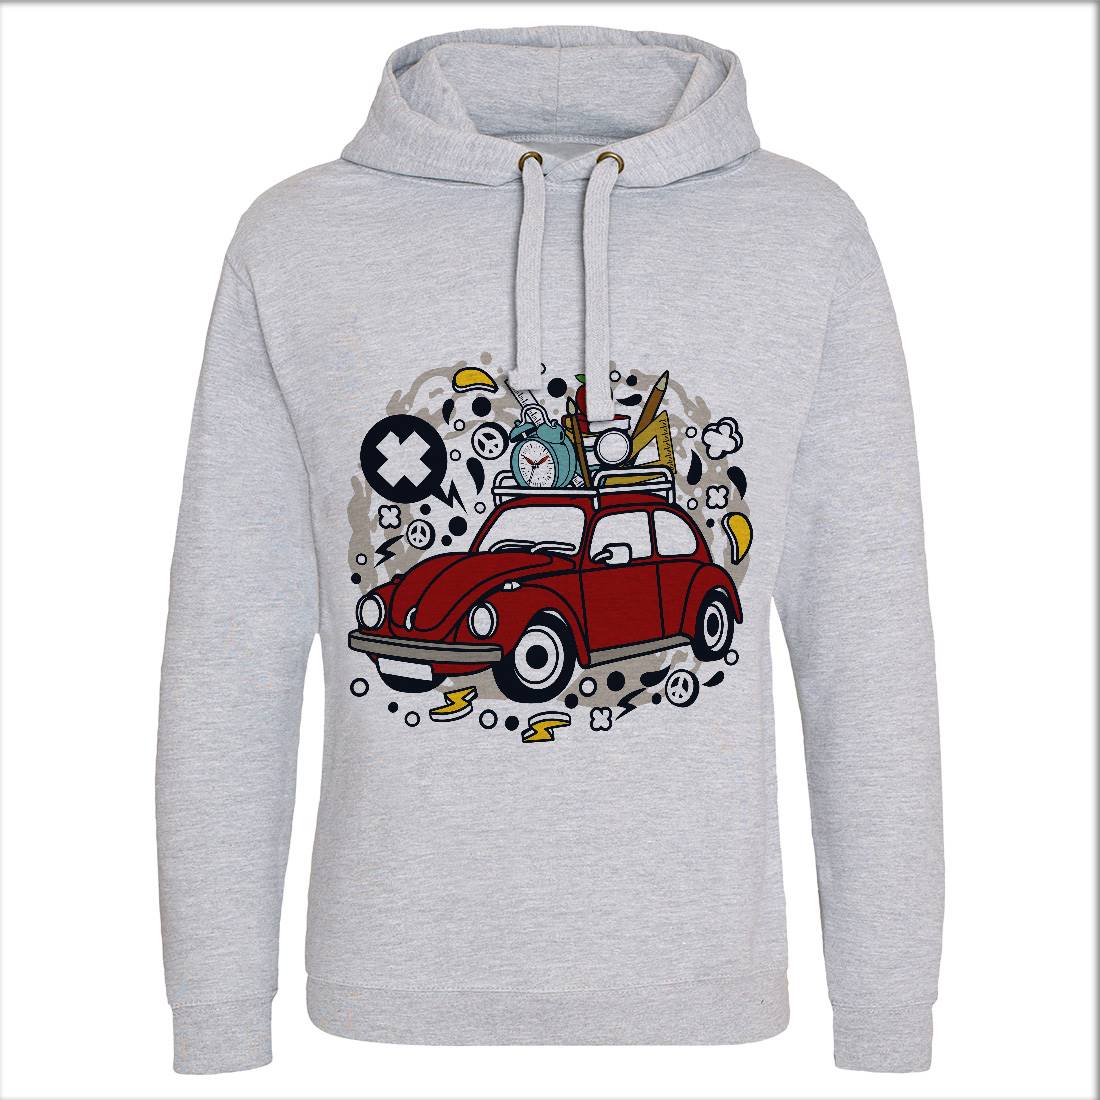 School Tour Mens Hoodie Without Pocket Work C641